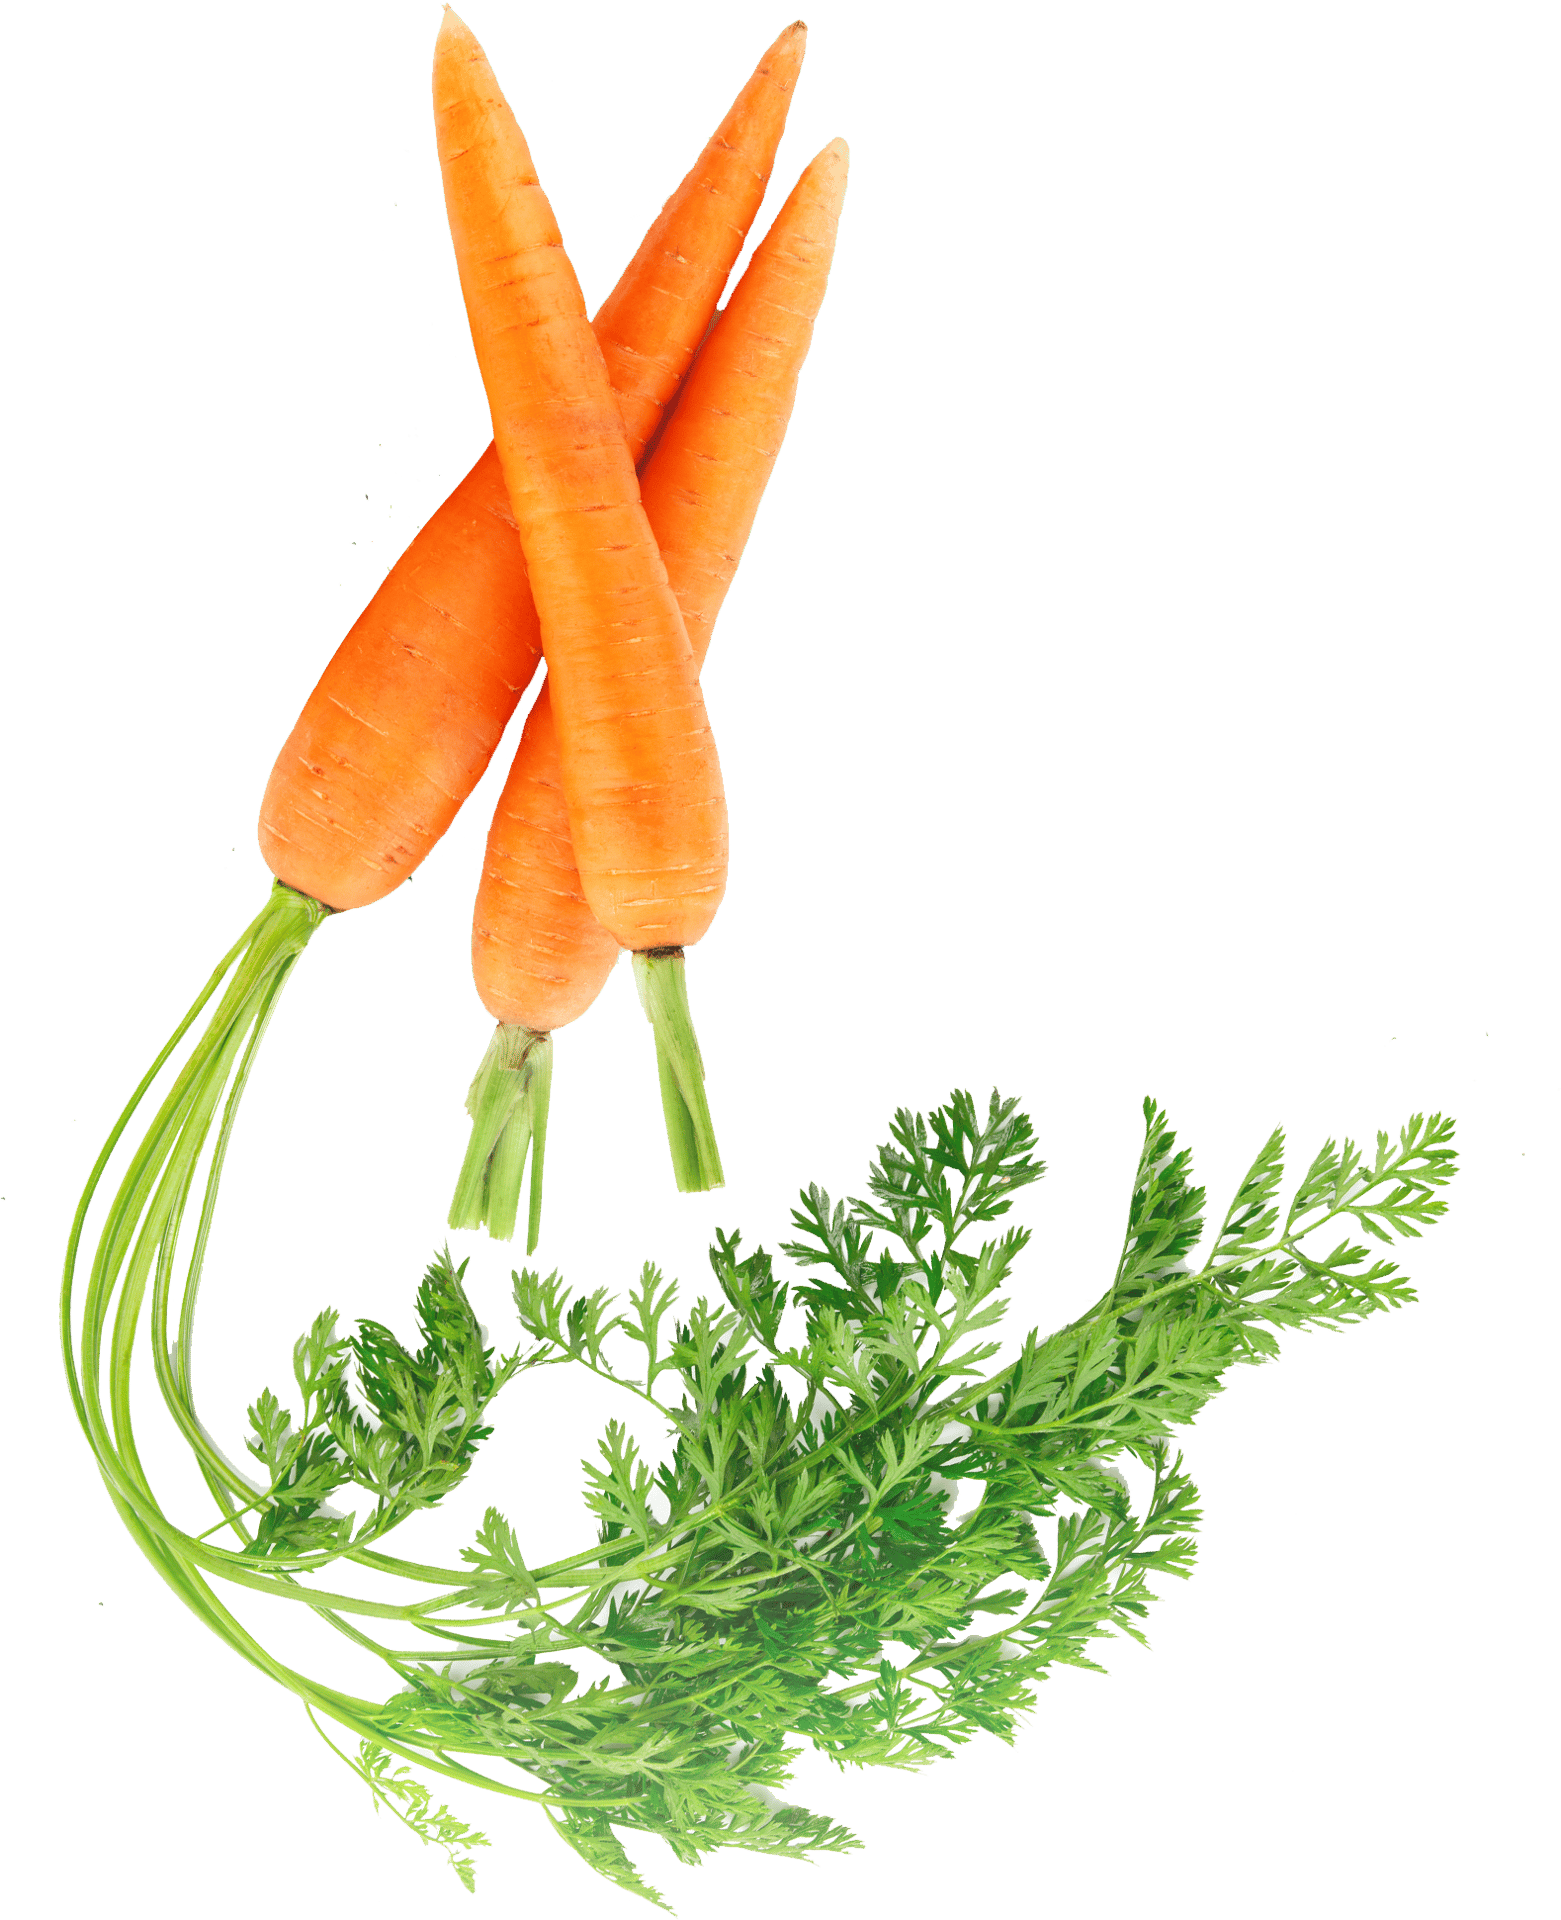 three fresh carrots with healthy full stems